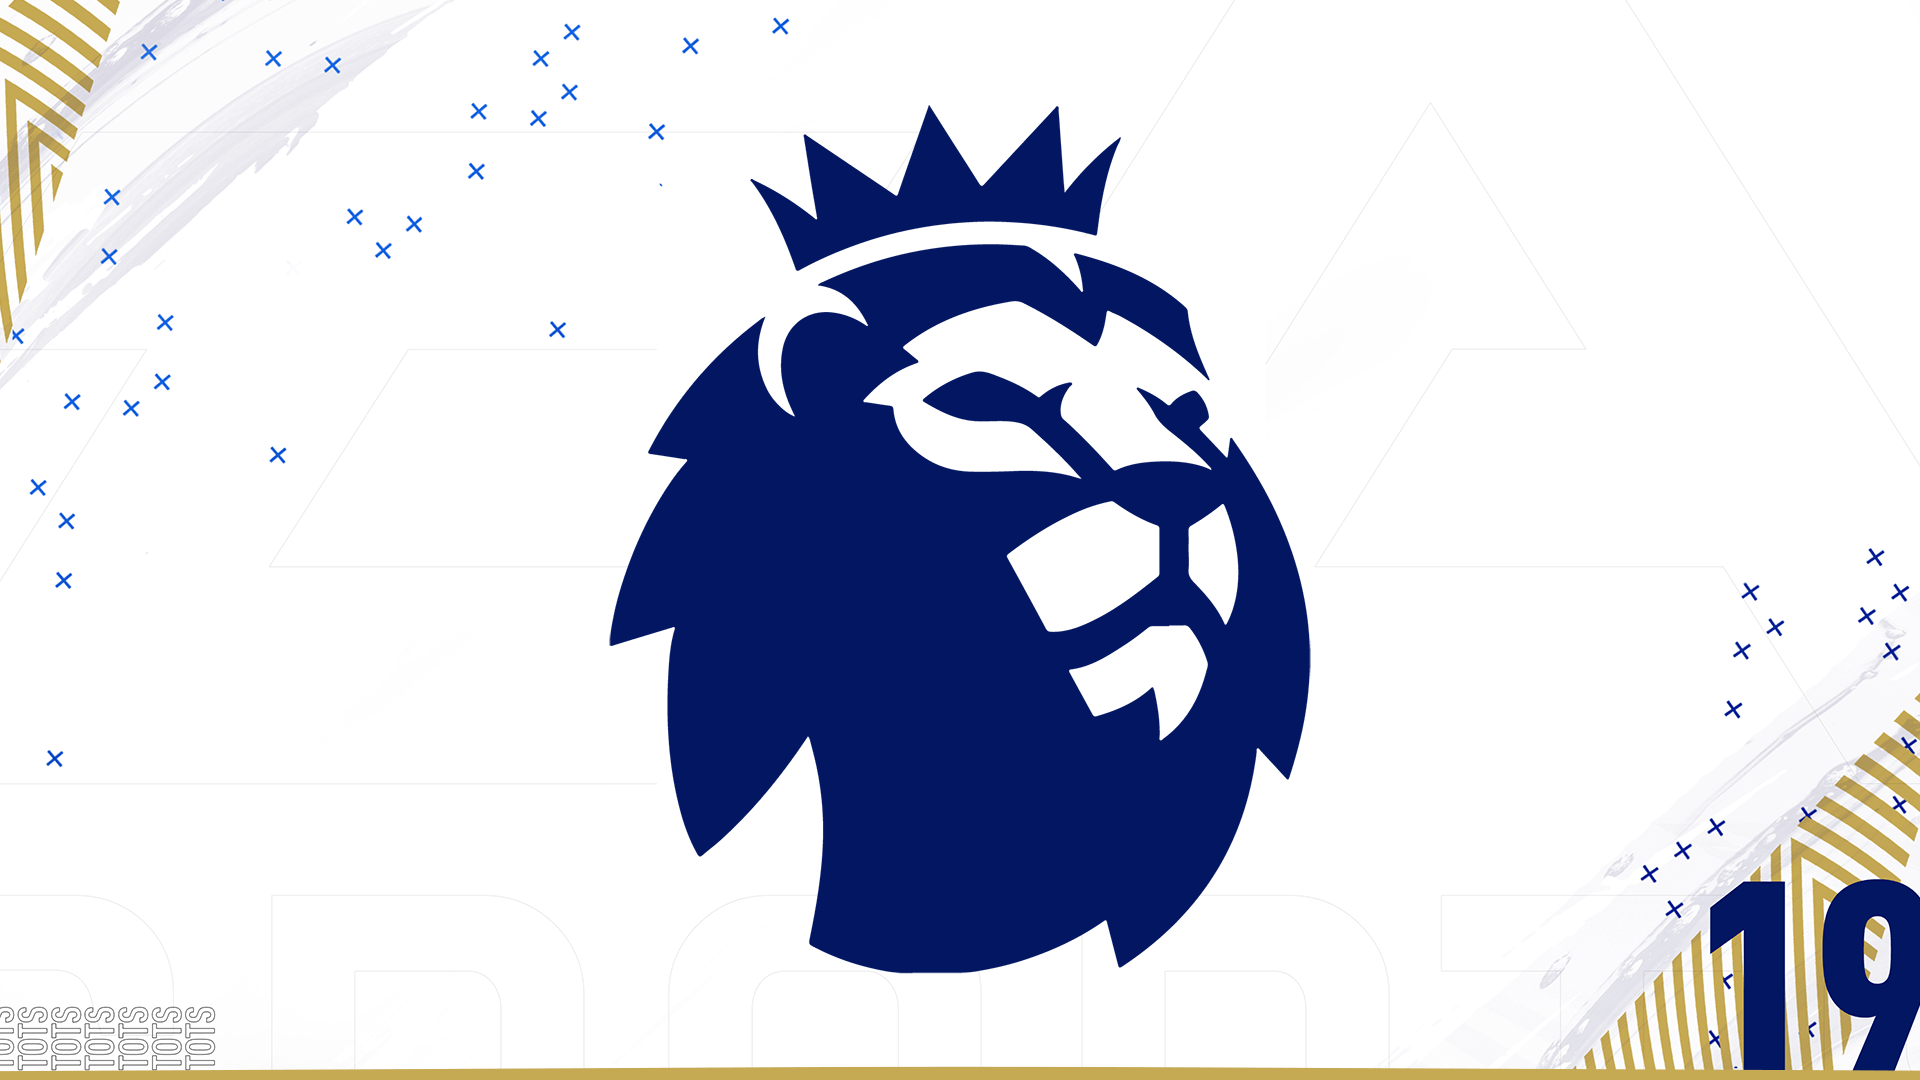 Leading The Charge: Premier League Delivers Exciting Football